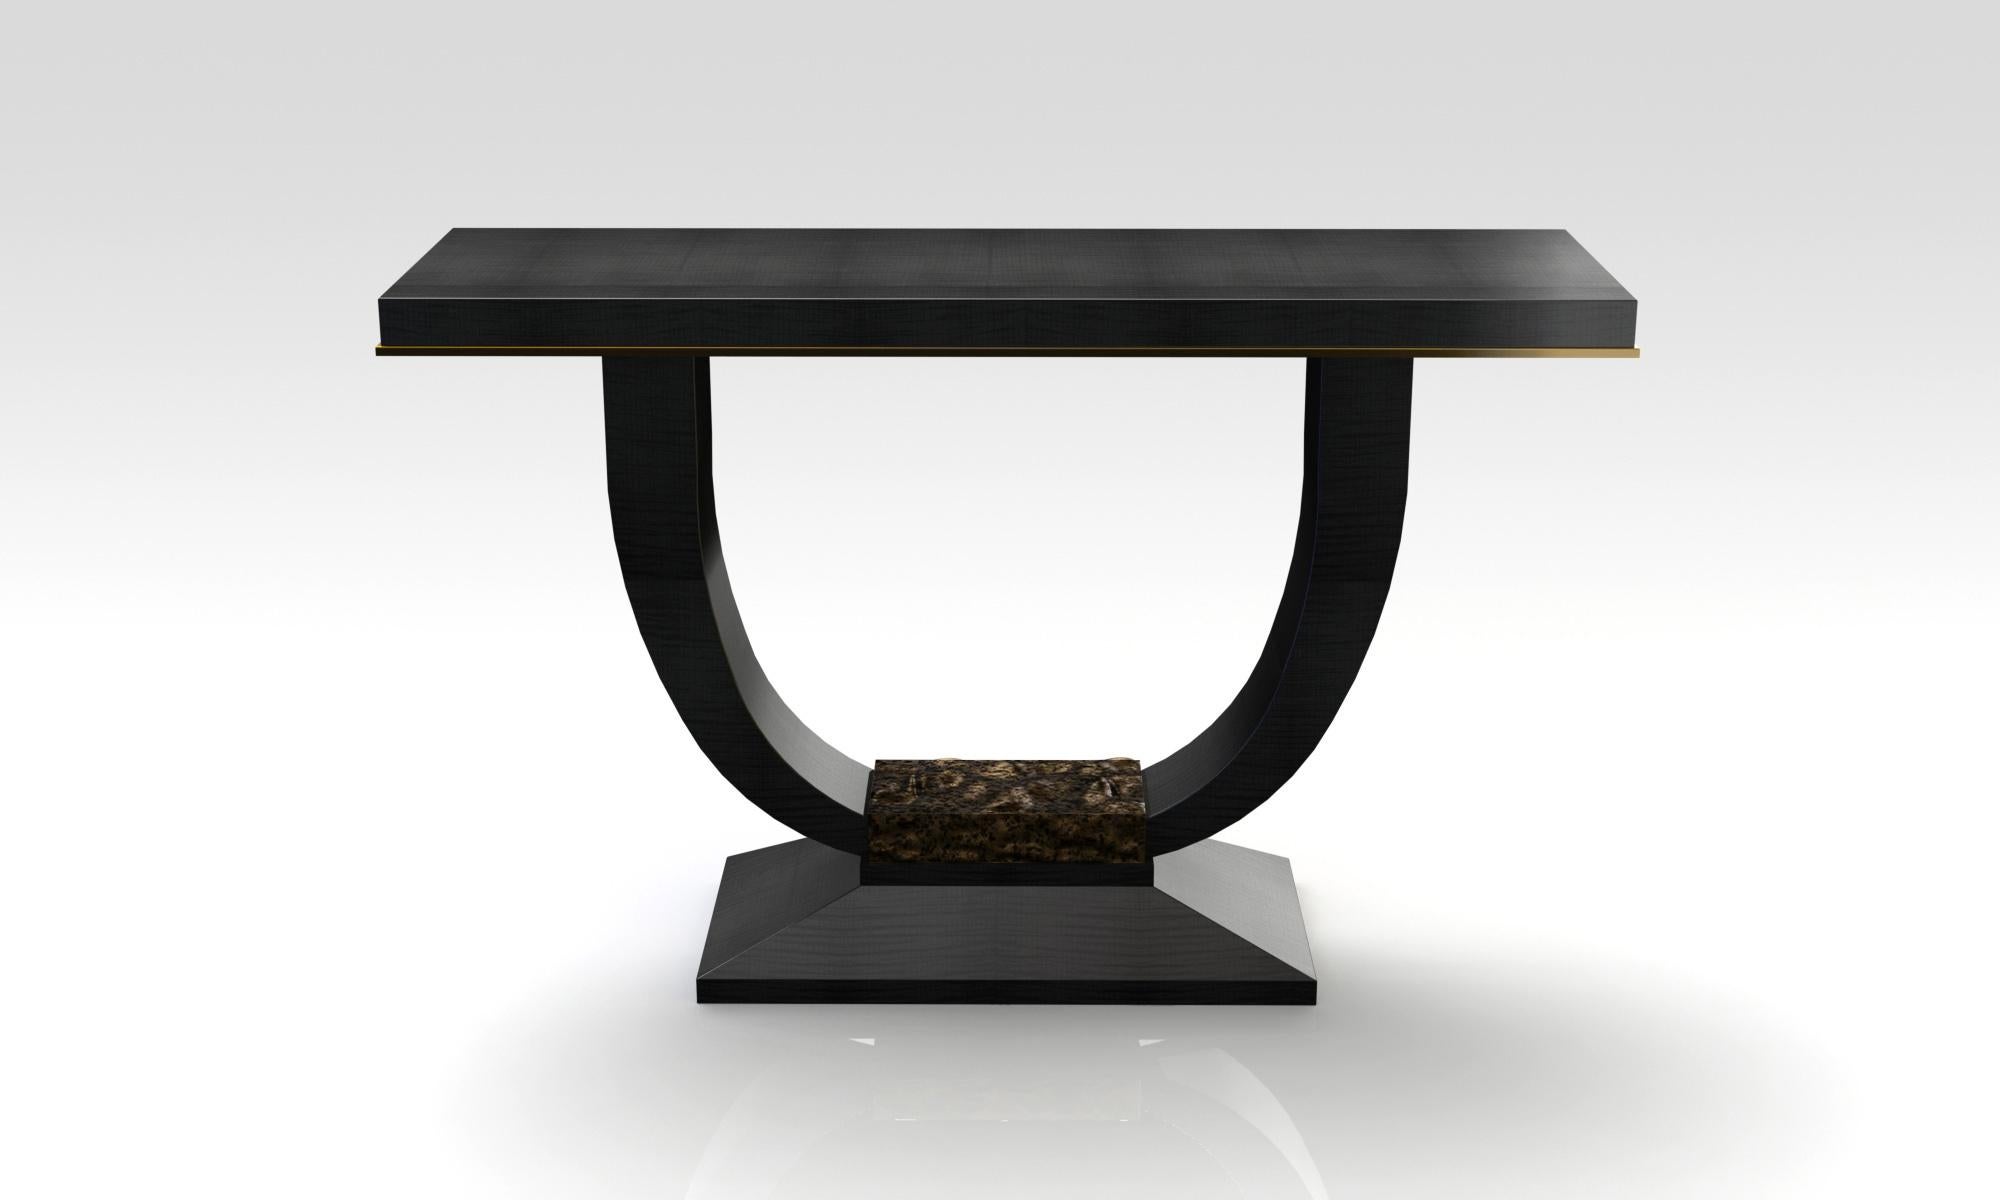 British Davidson's Art Deco Albany Console Table, in Sycamore Black with Polished Nickel